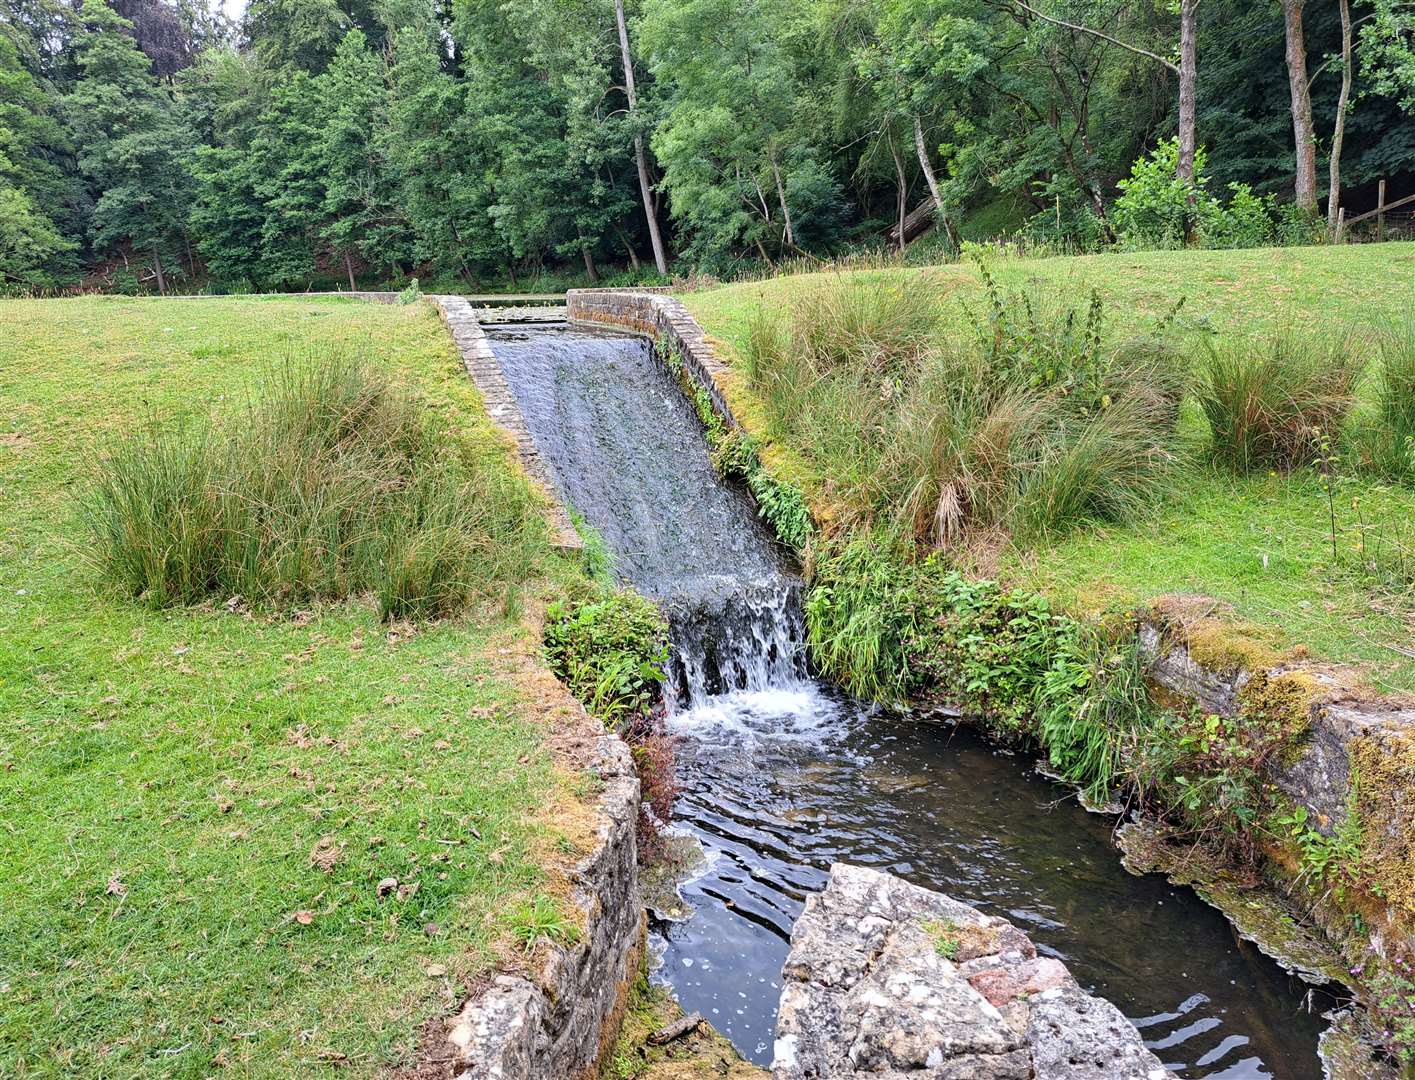 The stream leaves Heron Pond over a weir